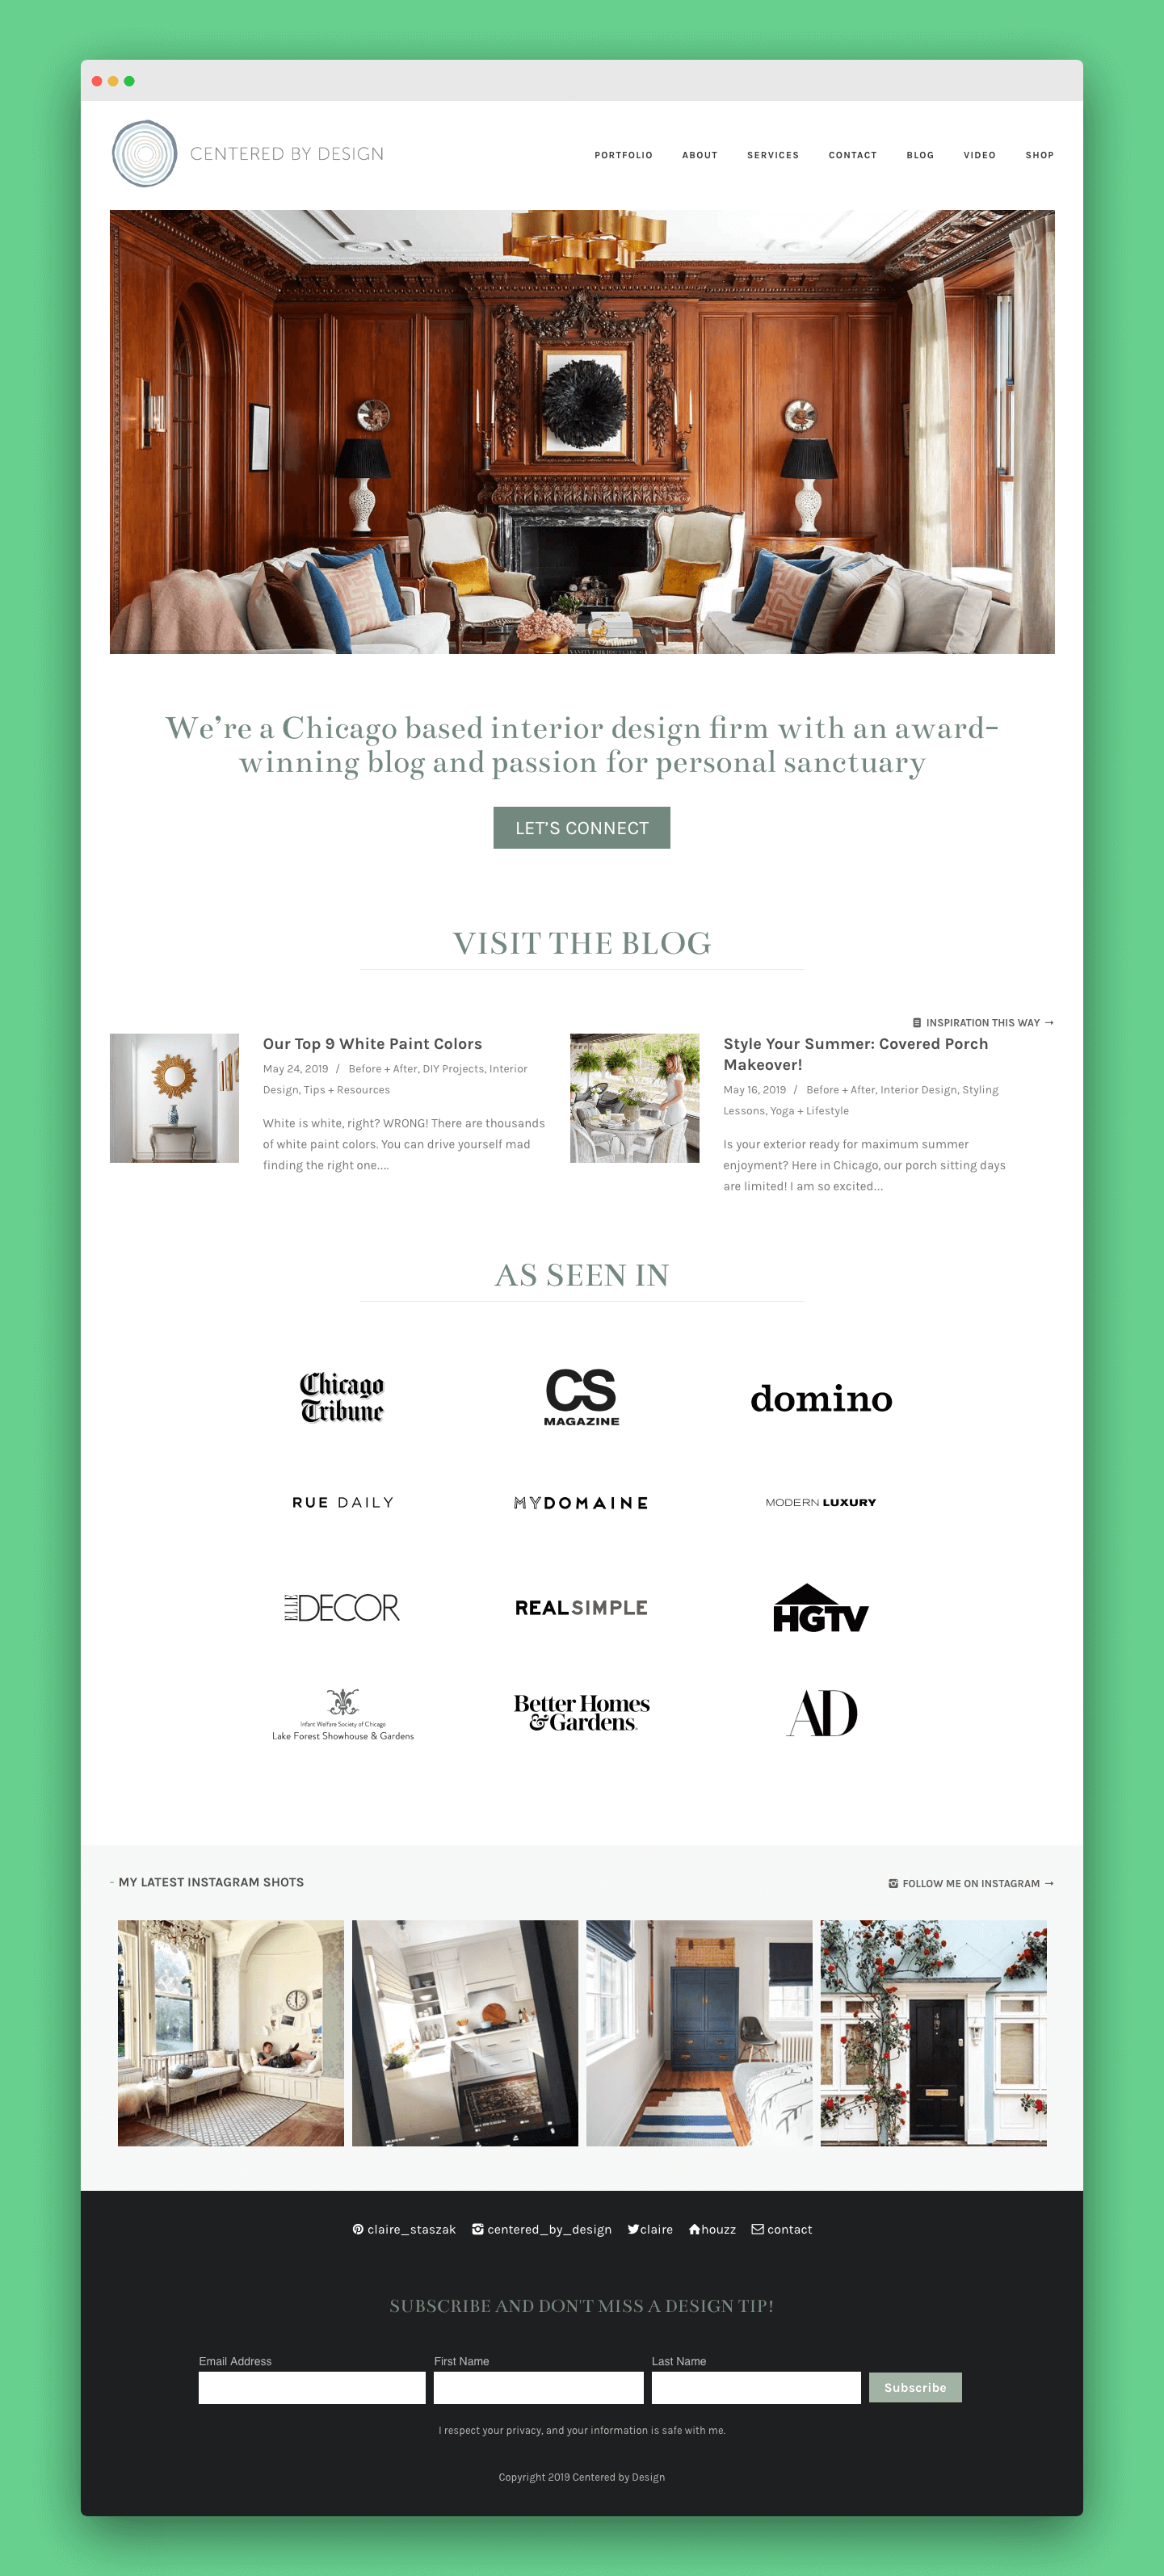 Centered by Design Homepage